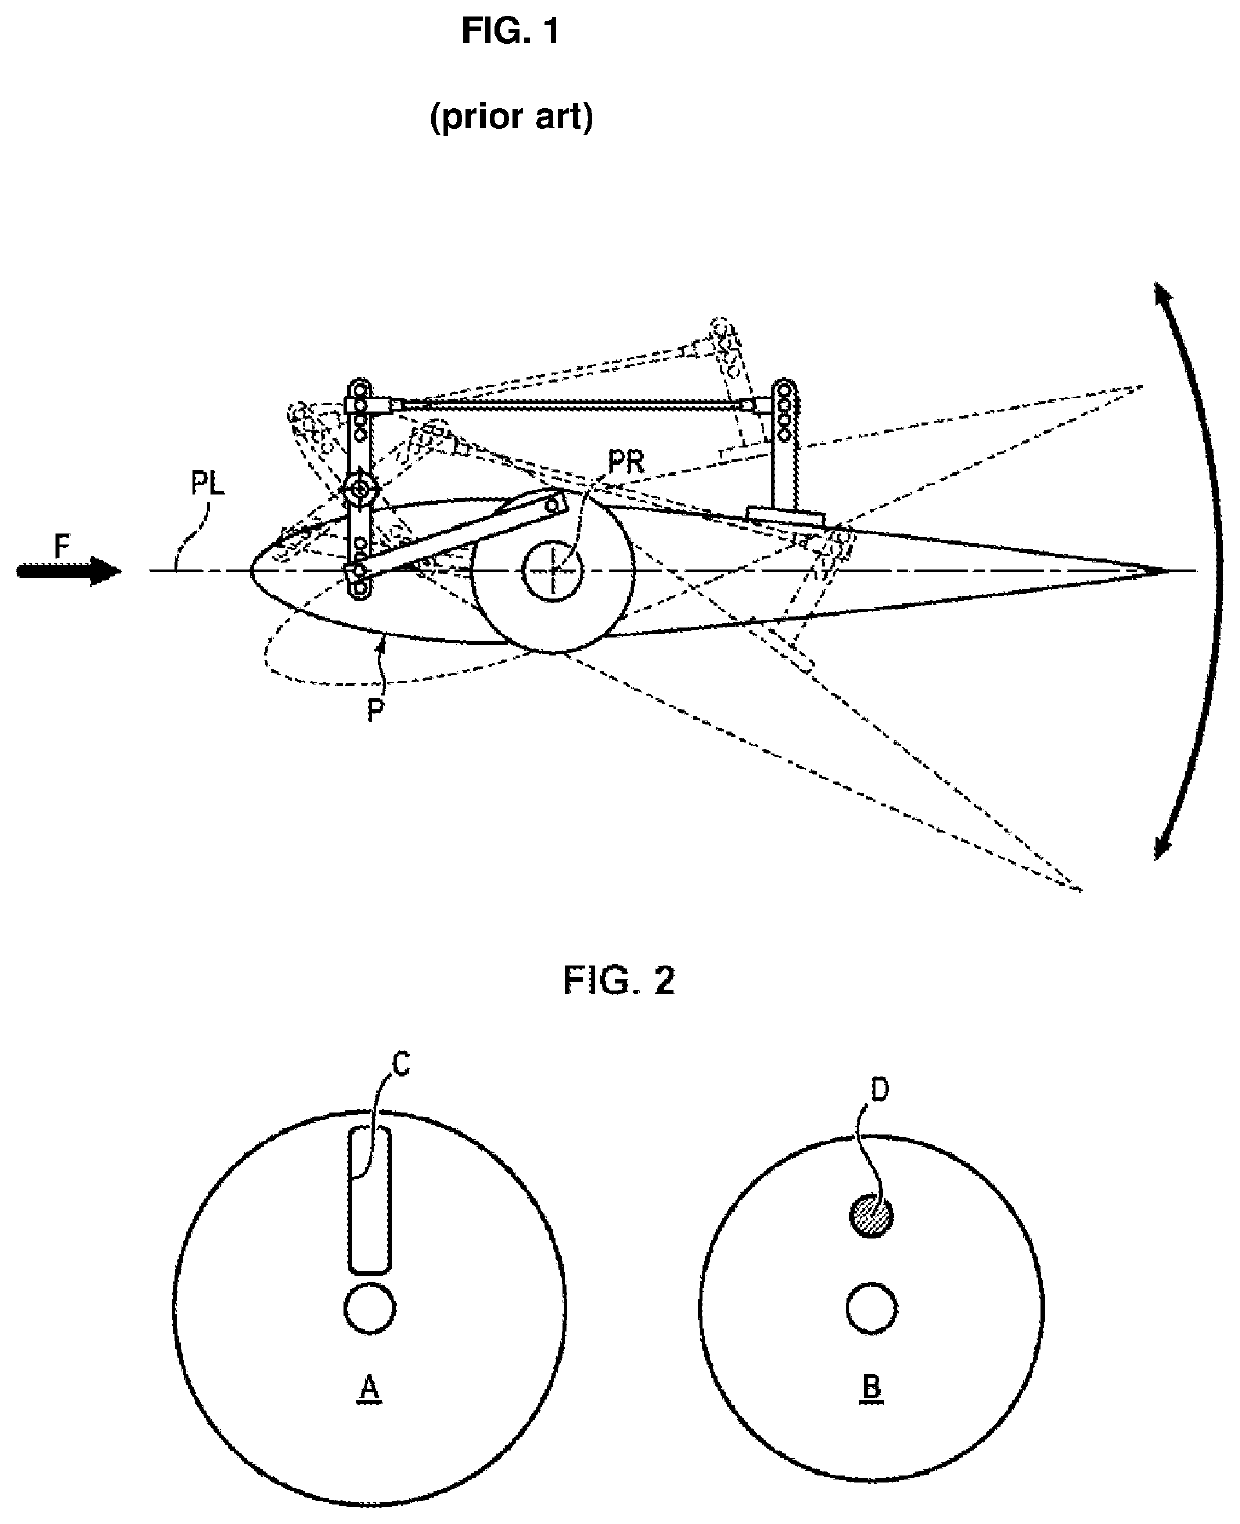 Fluidic rotor having orientable blades with improved blade control